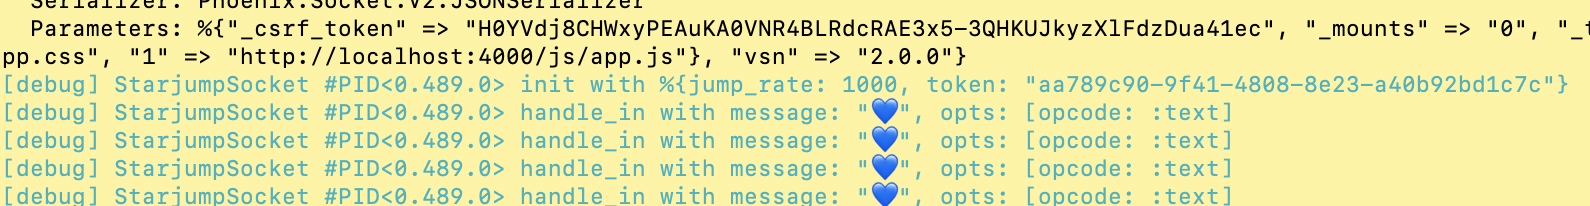 Heartbeat messages being logged to the console